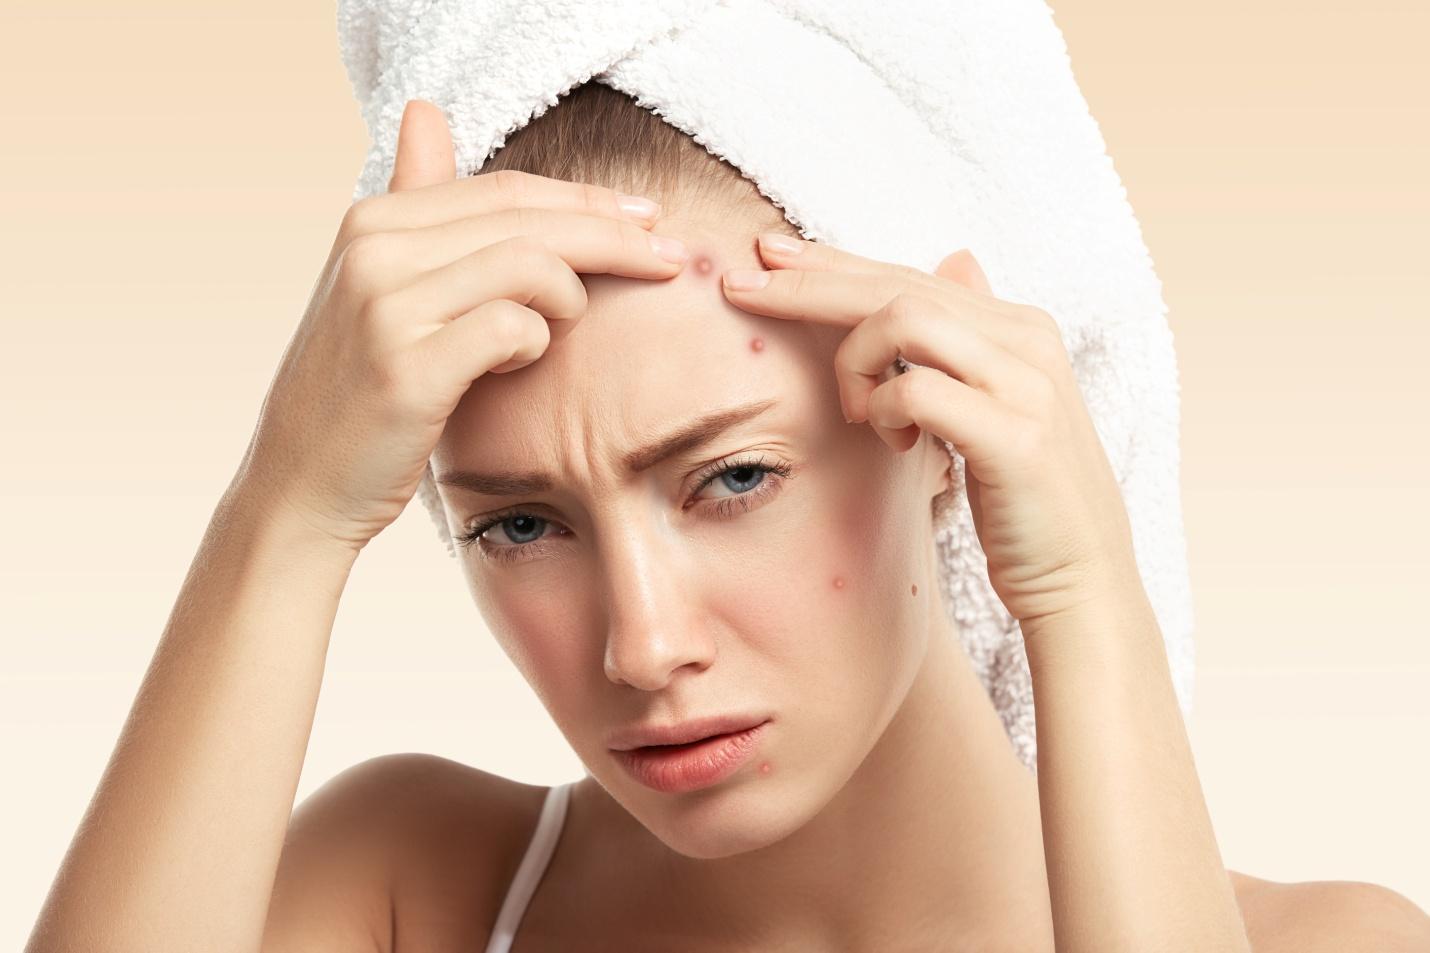 C:\Users\dell\Downloads\closeup-young-woman-with-towel-head.jpg